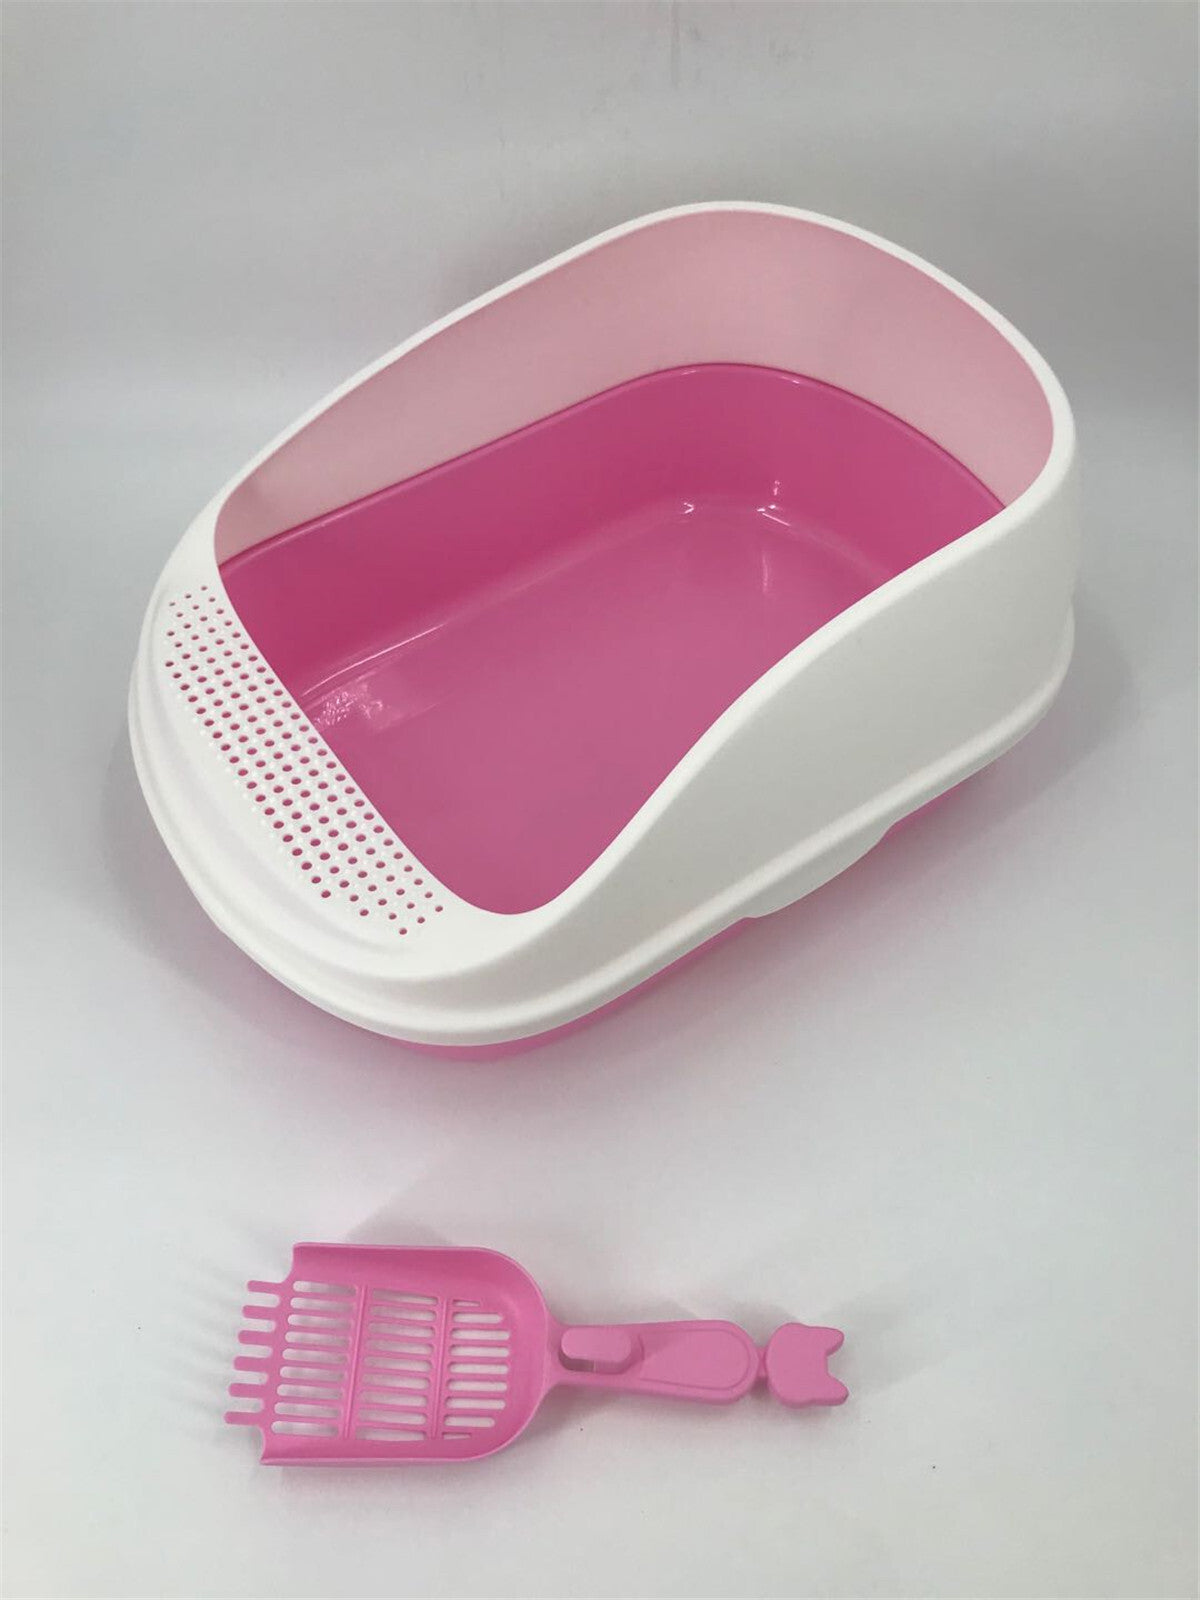 YES4PETS  Large Deep Cat Toilet Litter Box Tray High Wall with Scoop Pink